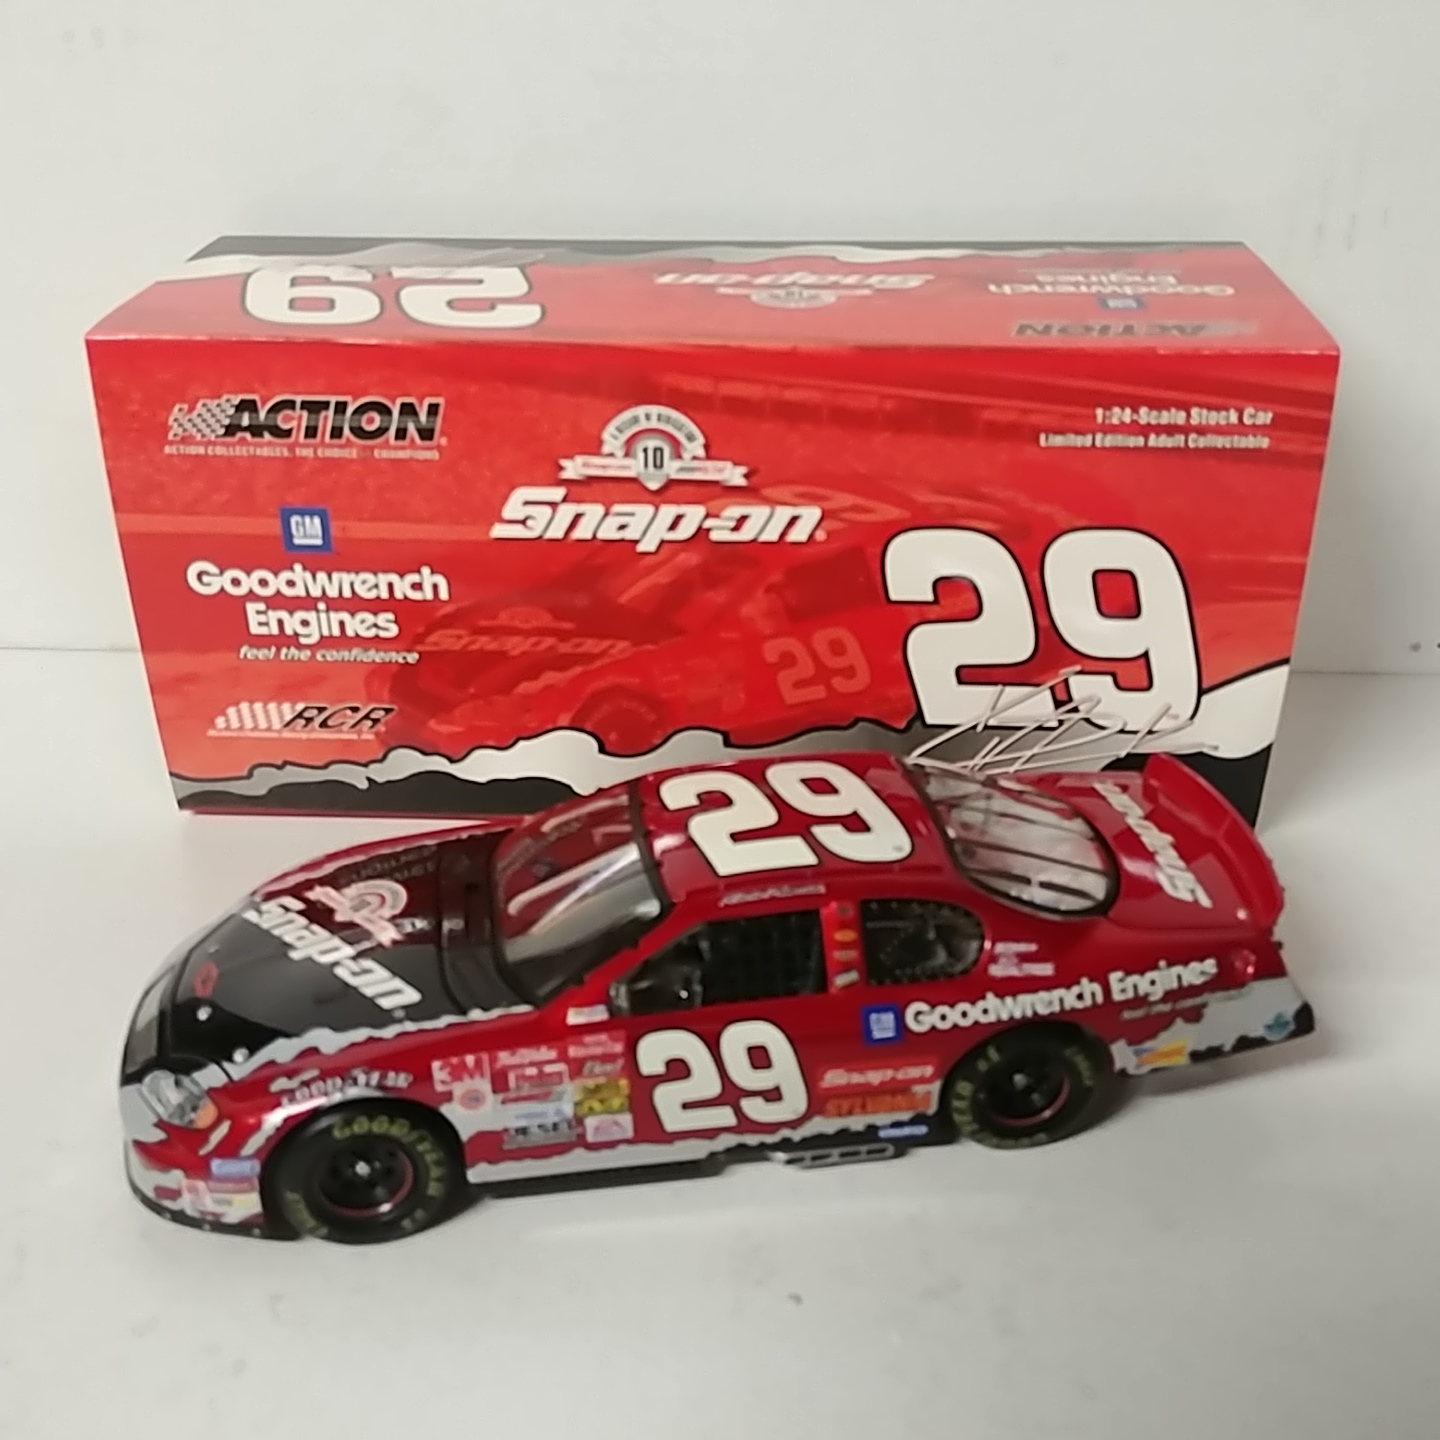 2003 Kevin Harvick 1/24th GM Goodwrench "Snap-On" c/w car